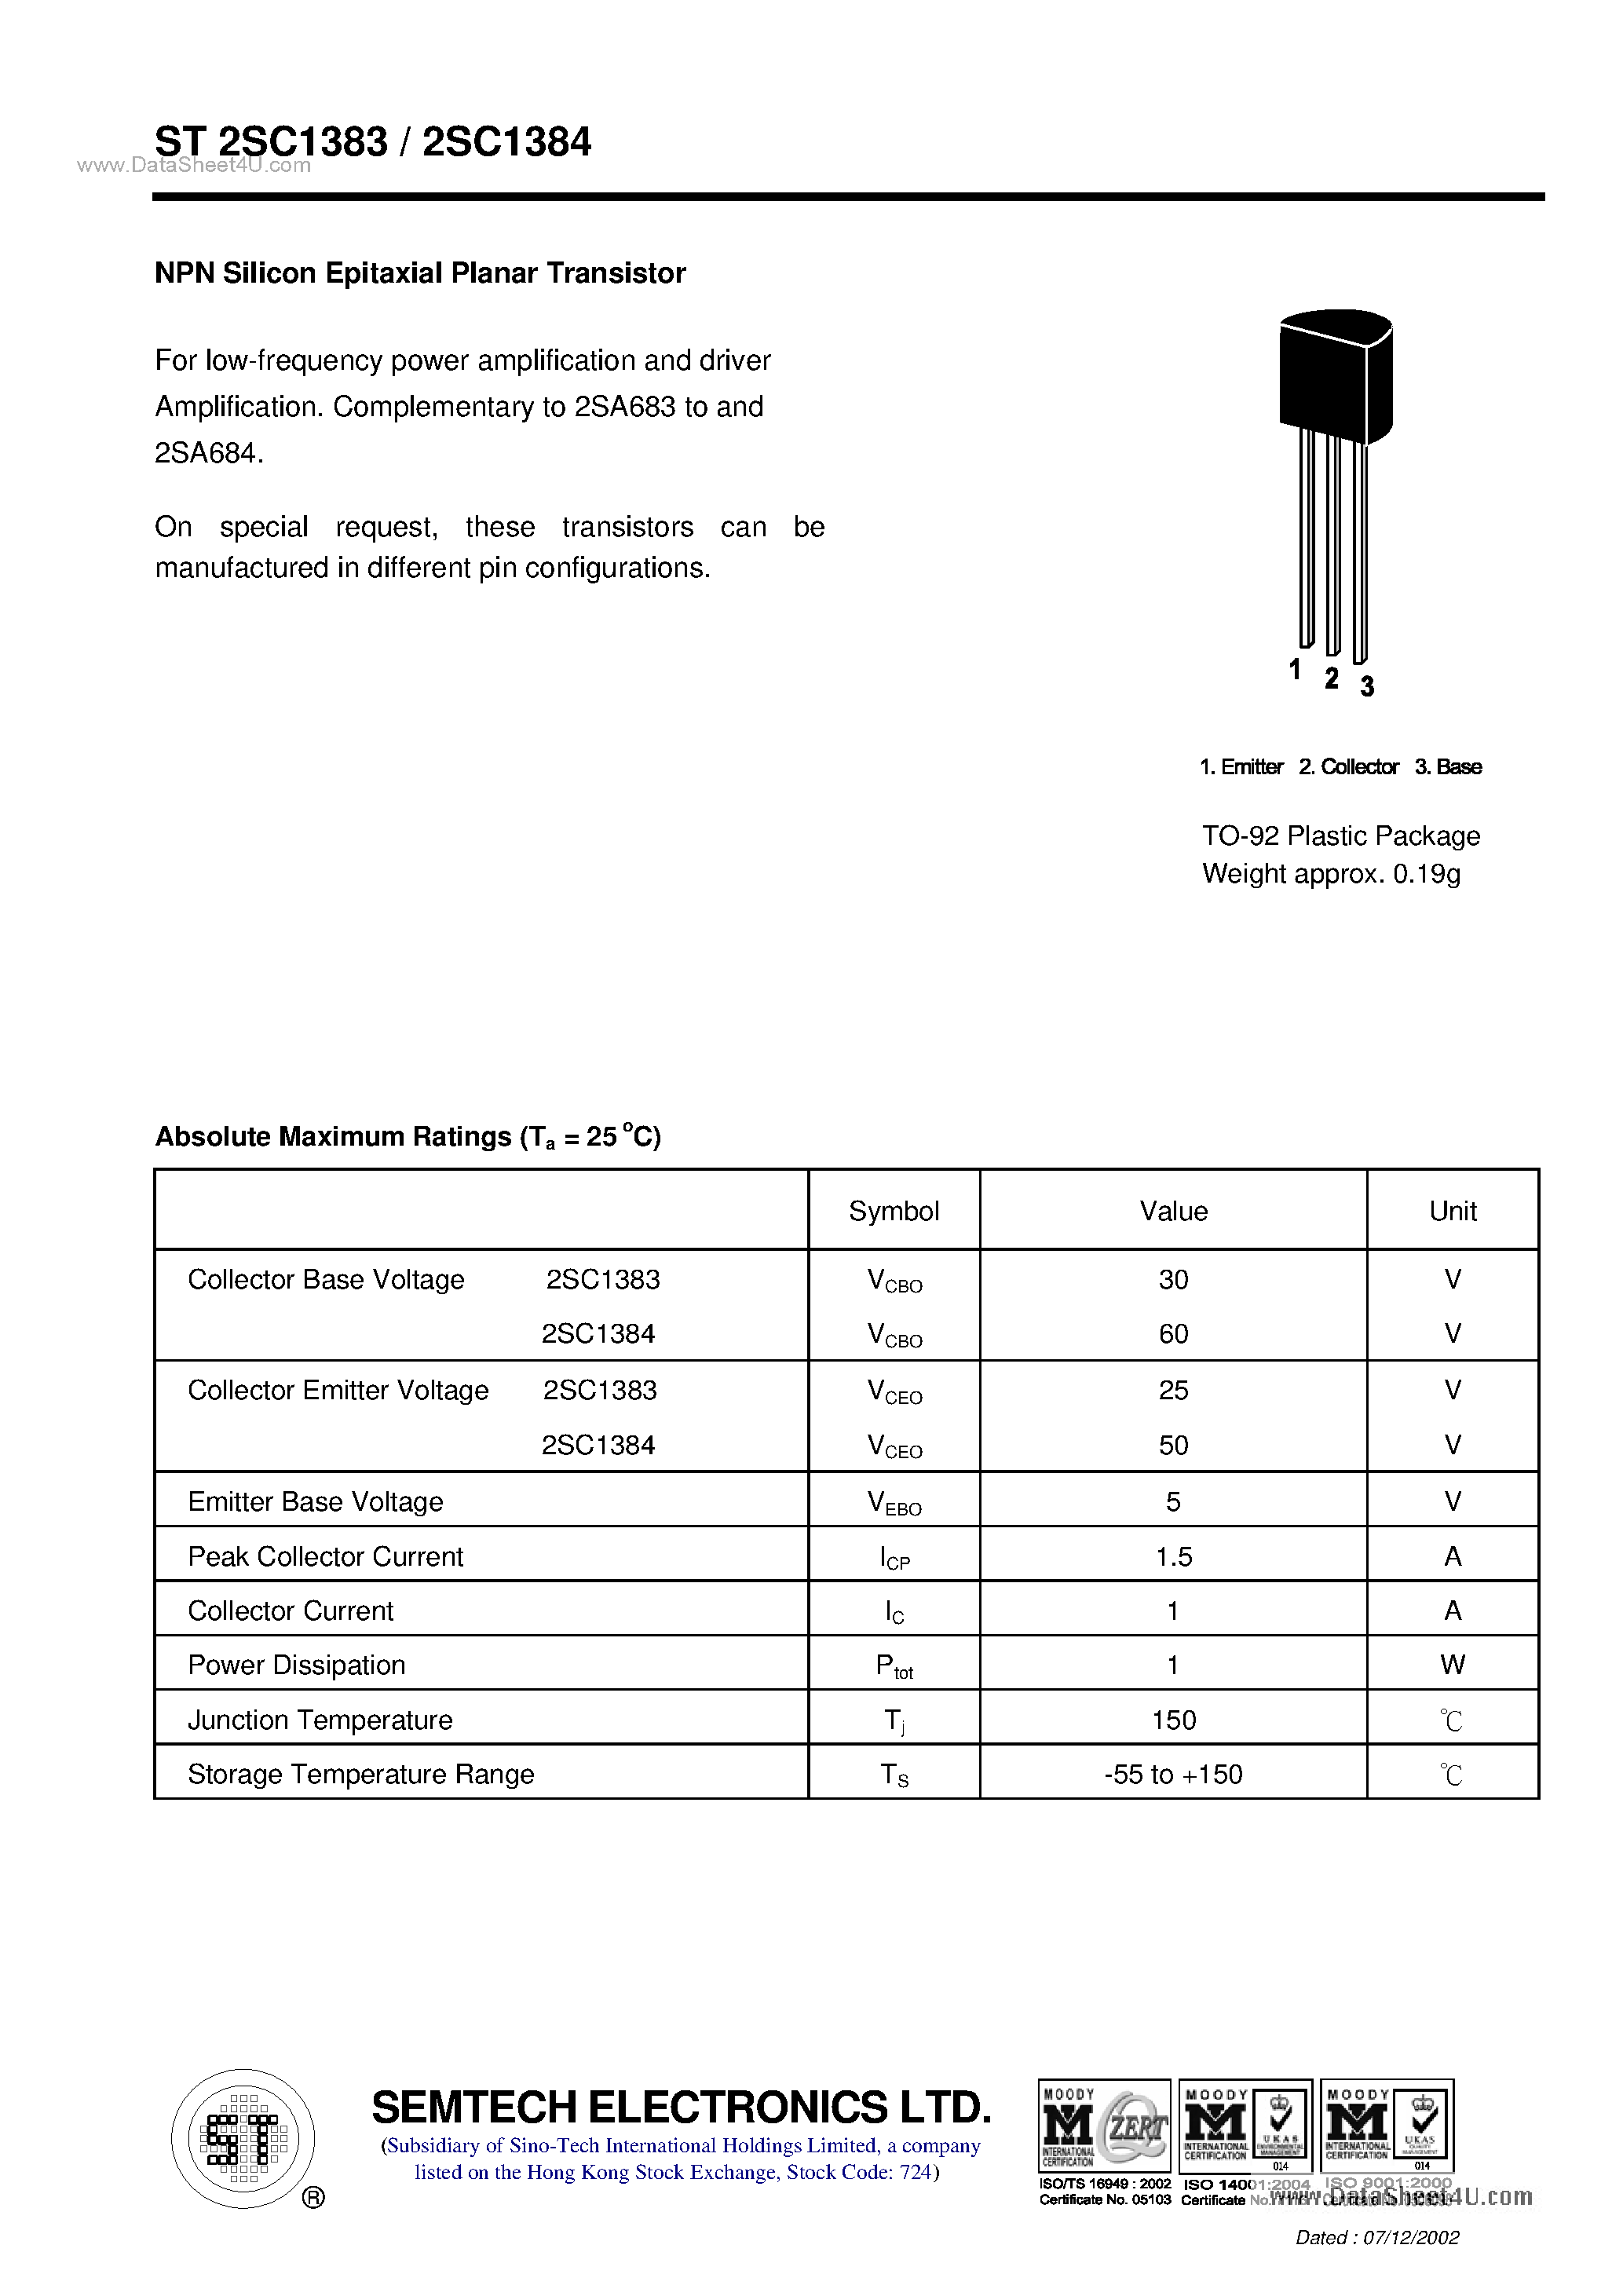 Datasheet ST2SC1383 - (ST2SC1383 / ST2SC1384) NPN Silicon Epitaxial Planar Transistor page 1